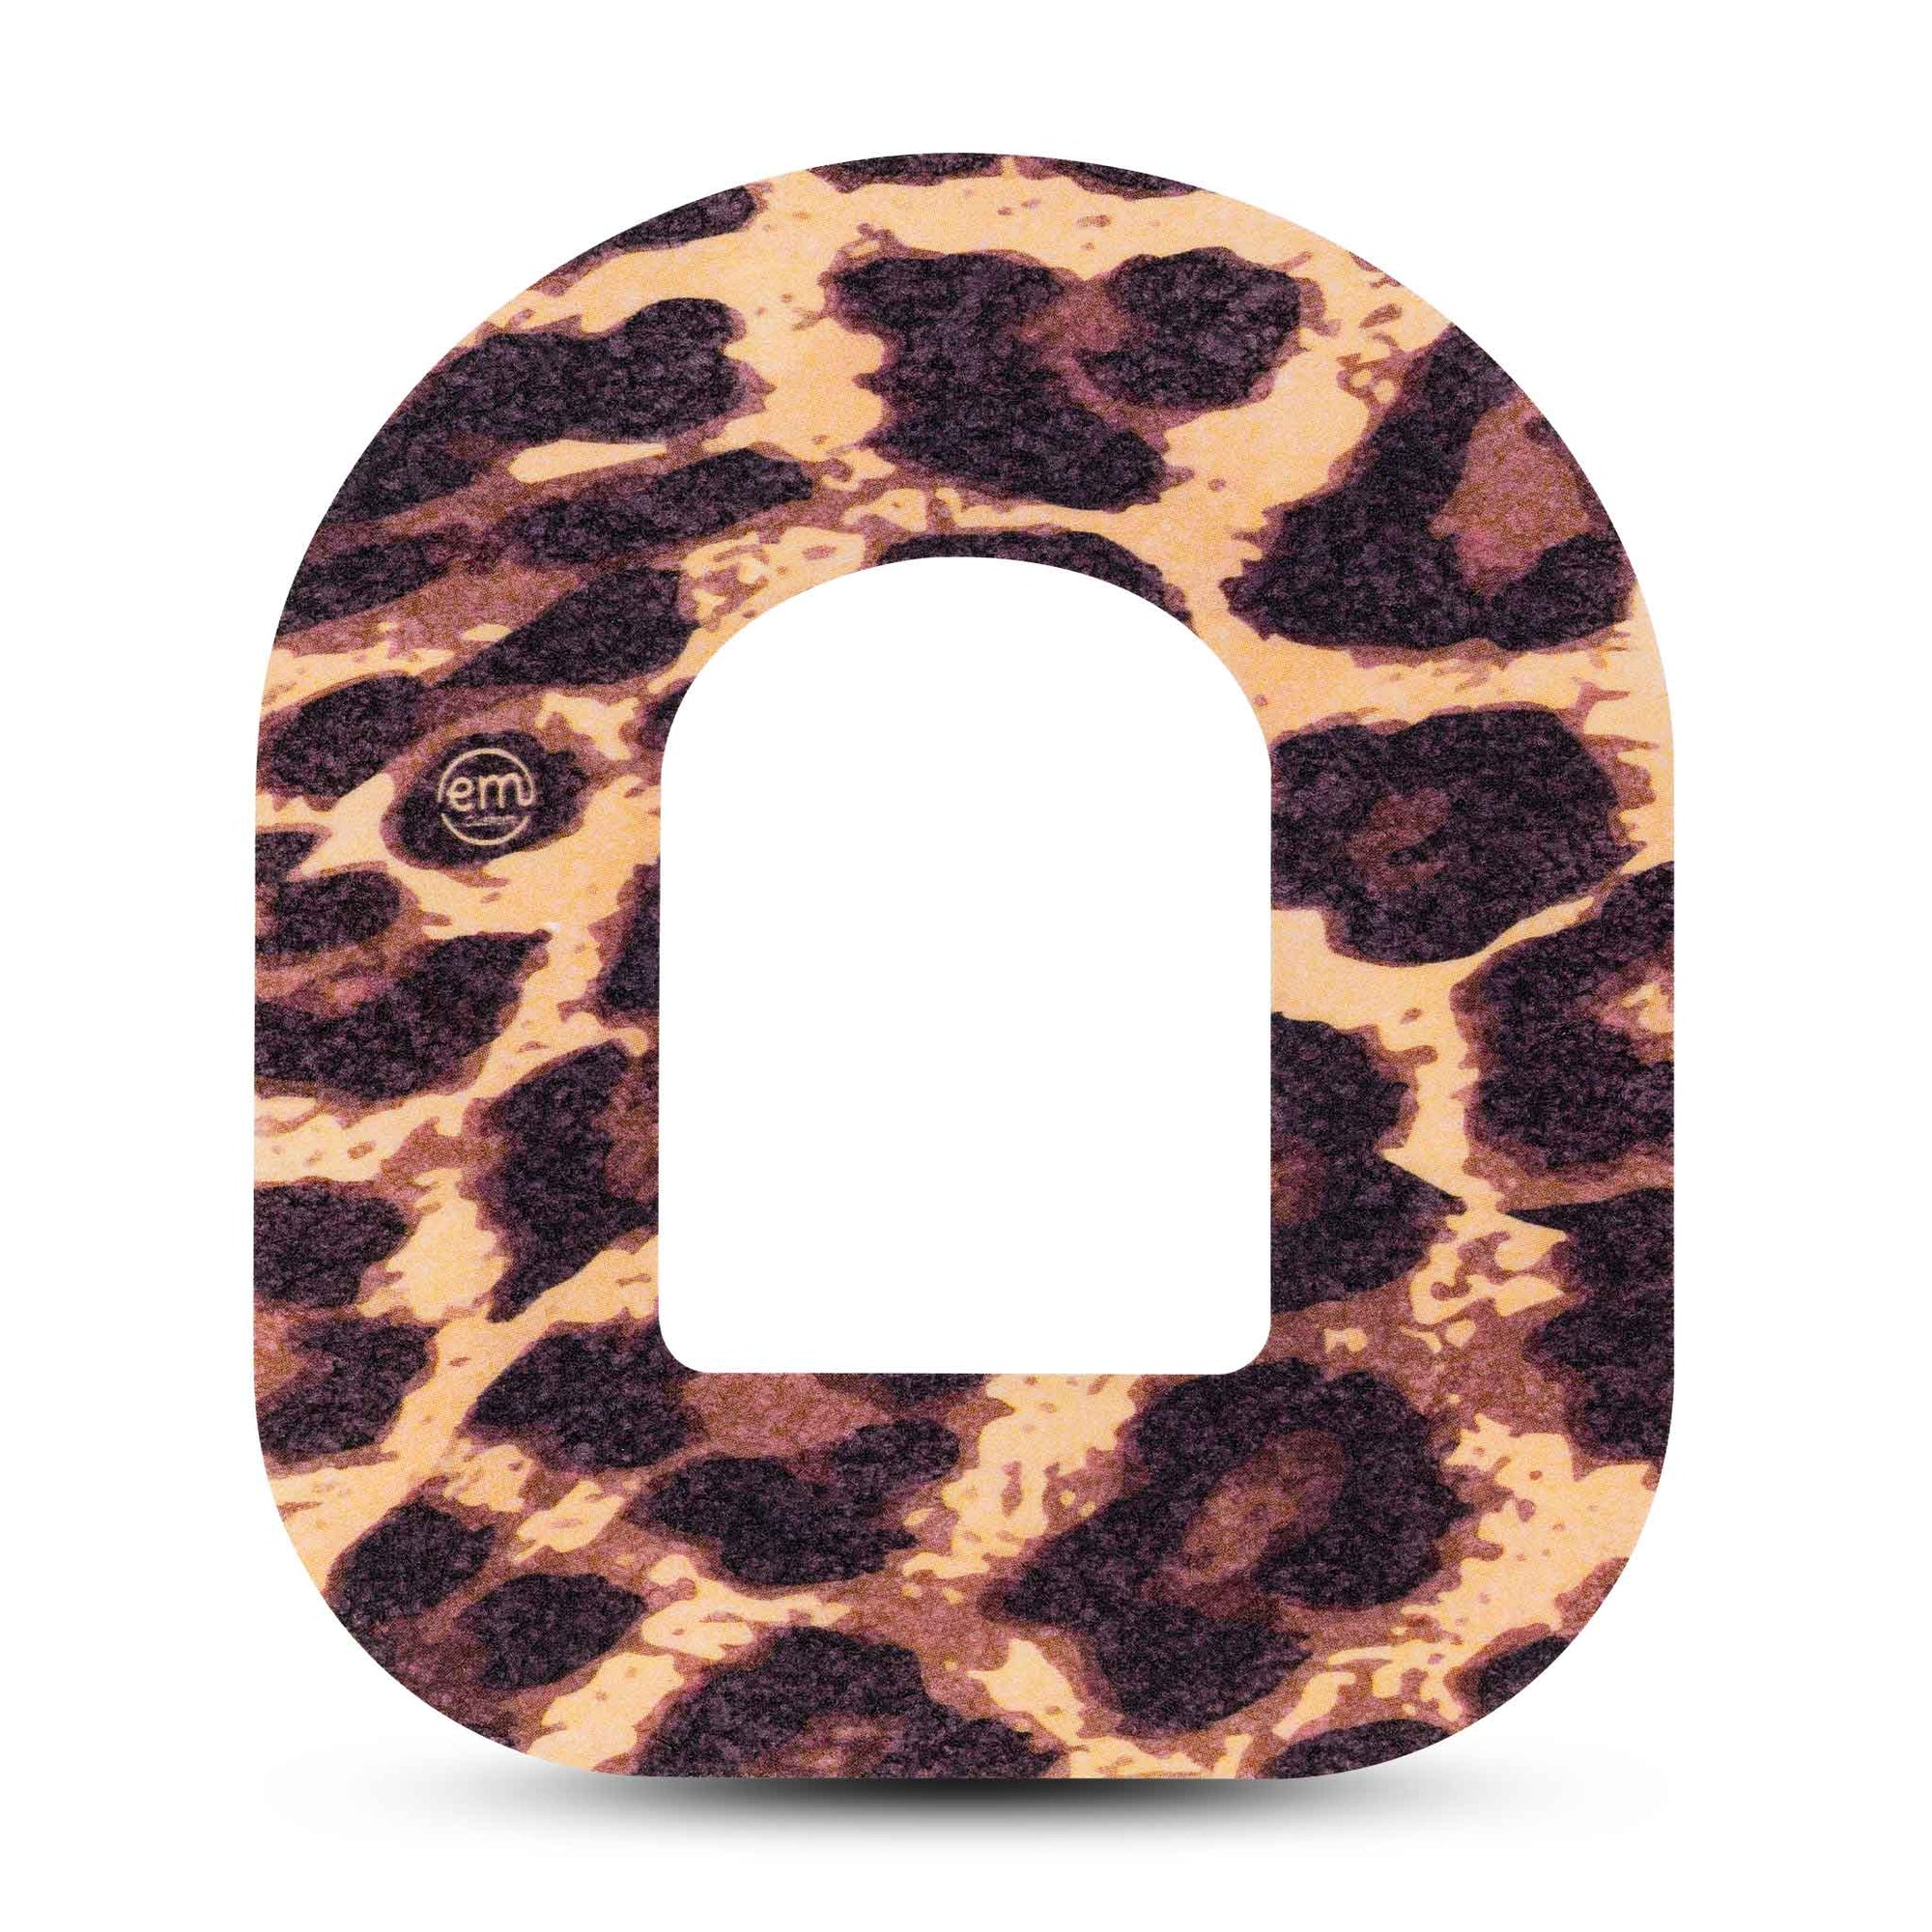 ExpressionMed Leopard Print Pod CMG Single Tape ExpressionMed